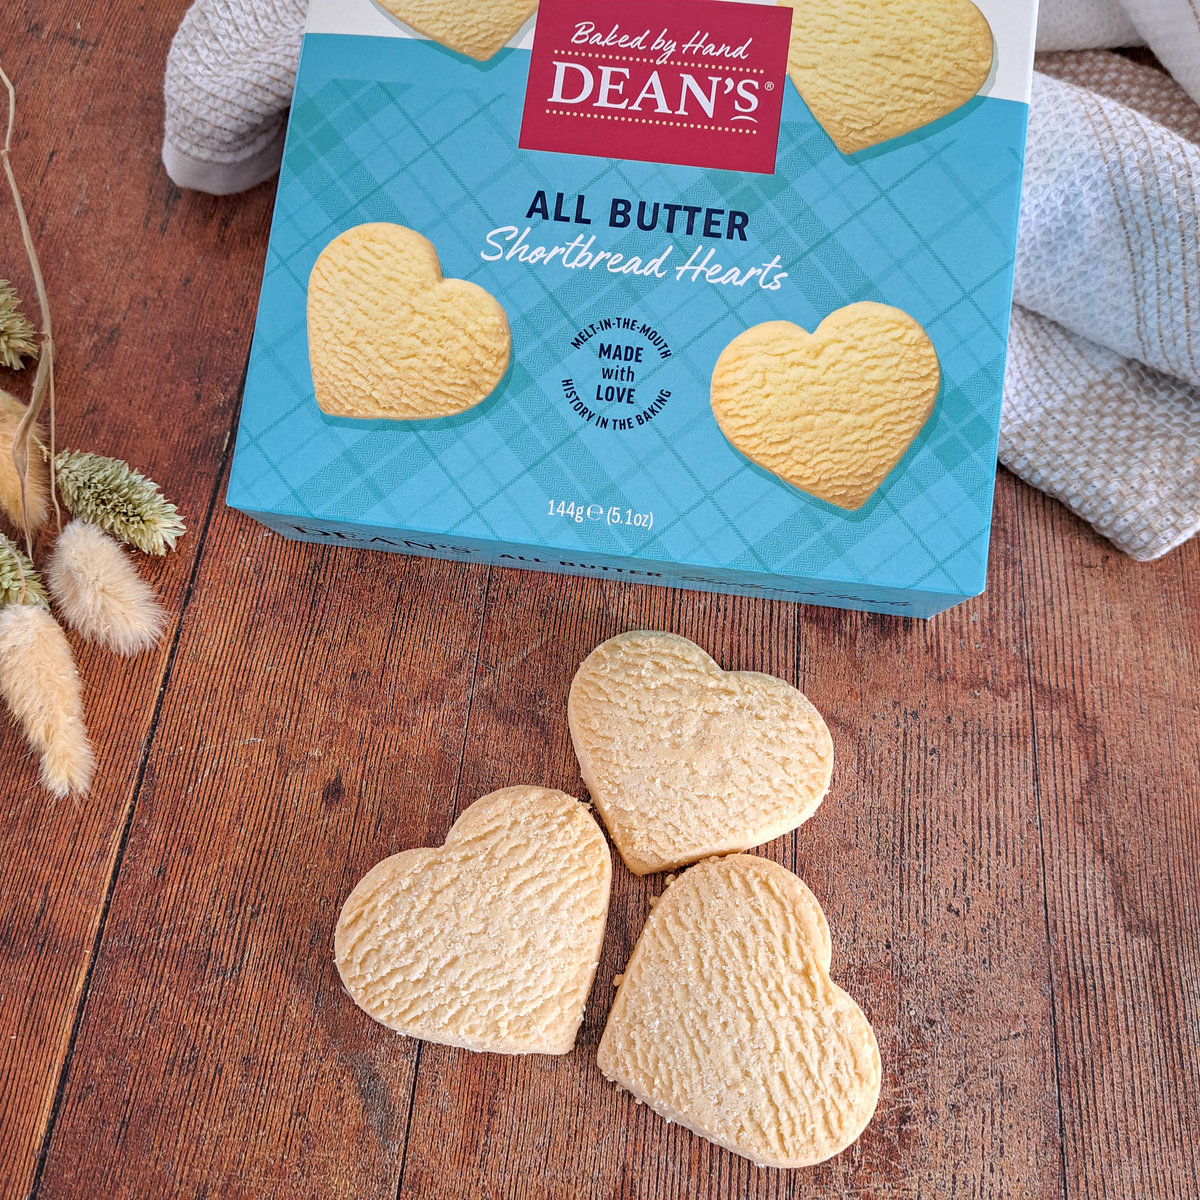 Buy the All Butter Shortbread Hearts 144g online at Dean's